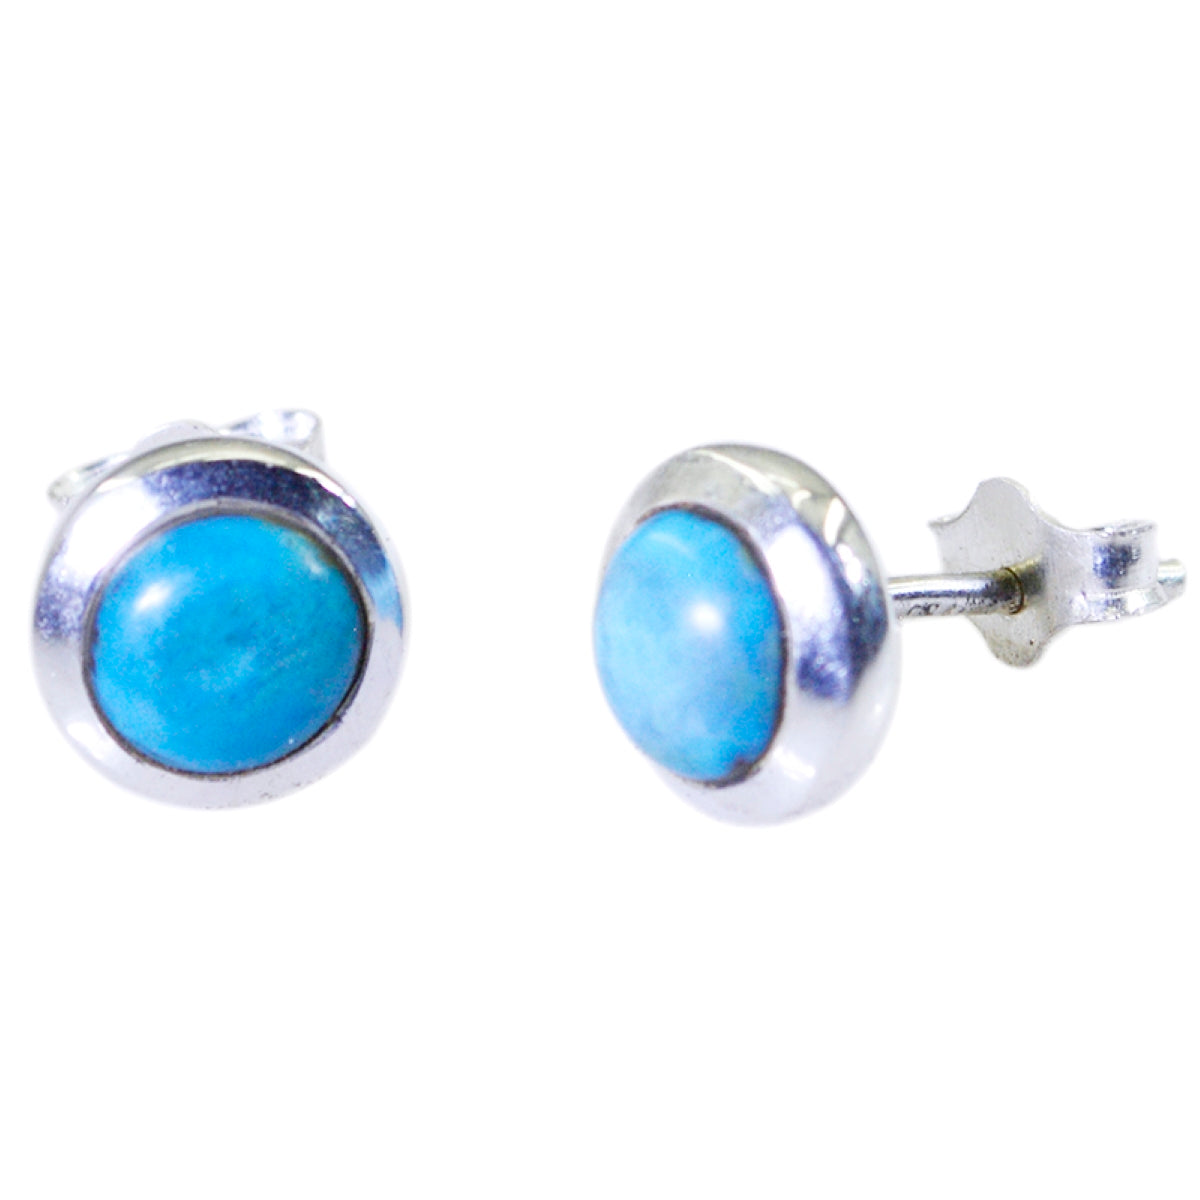 Riyo Good Gemstones round Cabochon Multi Turquoise Silver Earrings gift for brithday